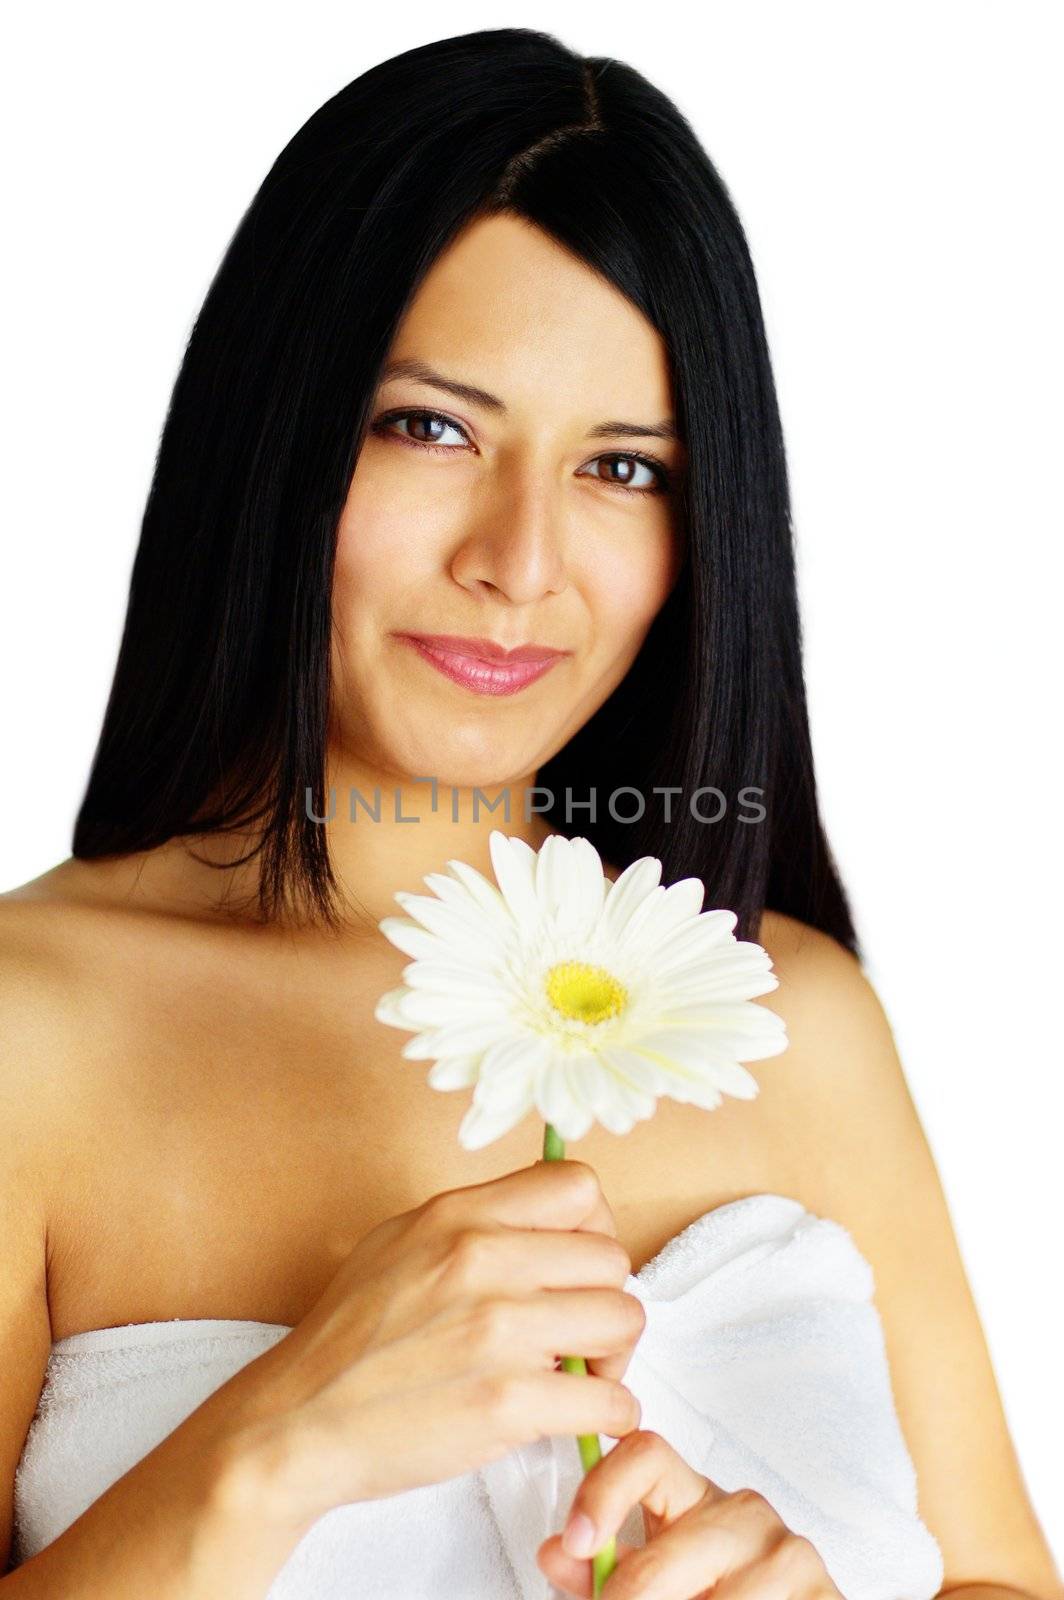 Beautiful young spa woman holding a flower against white.